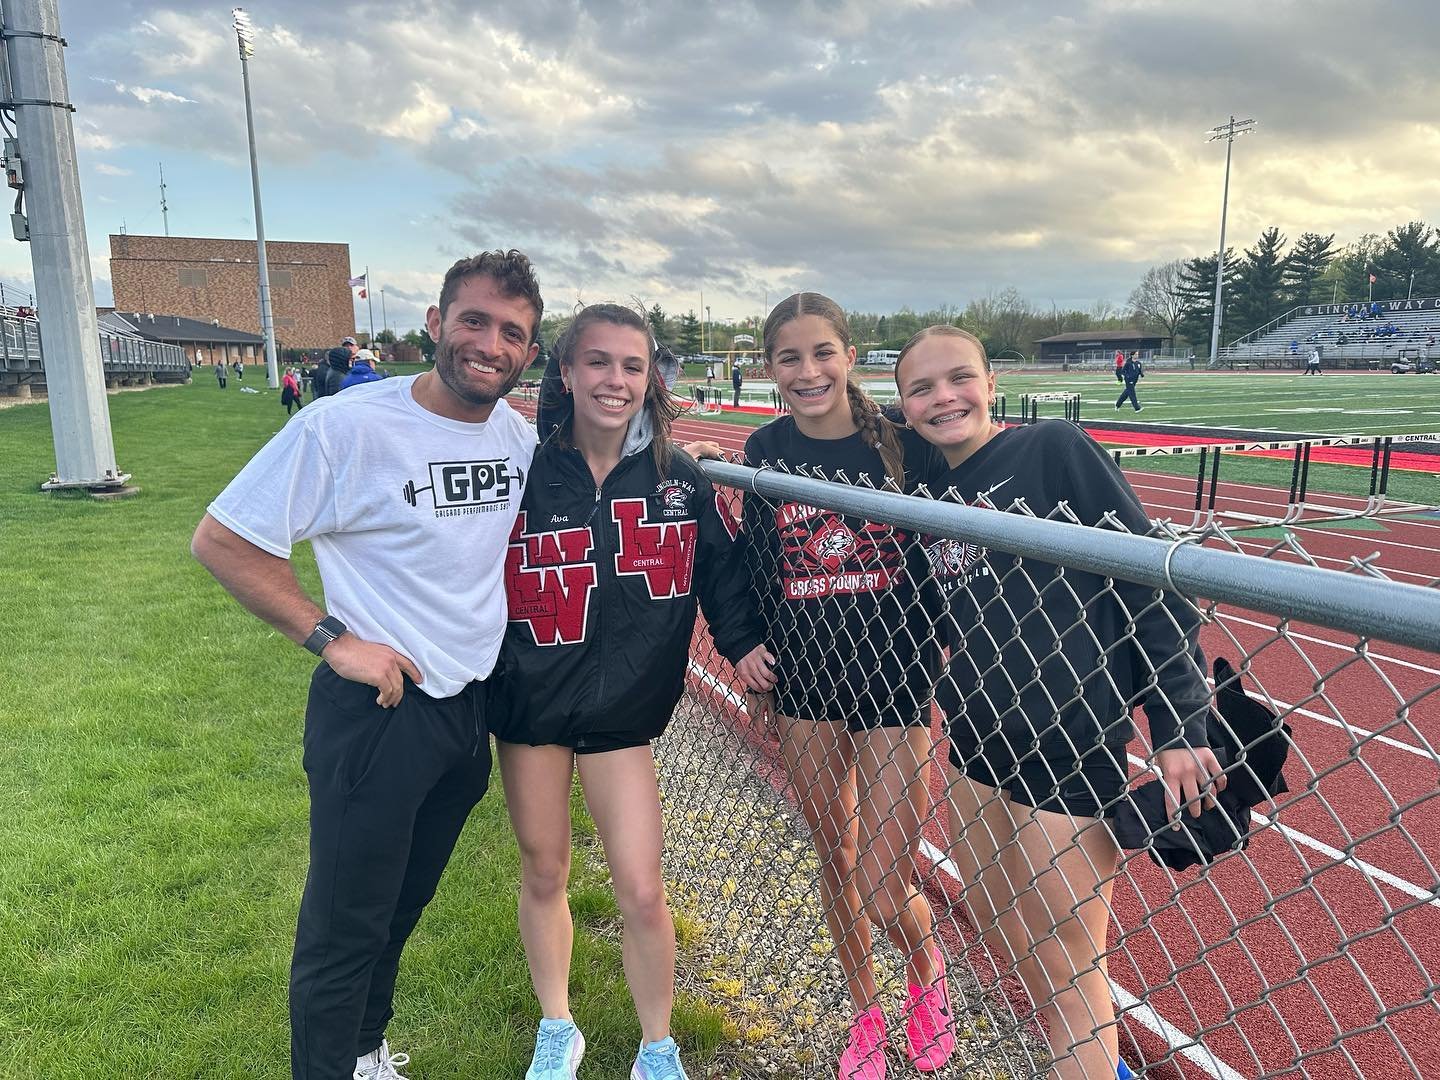 Great seeing some of our LWC track gals compete this evening!!!

@adughetti28 @miaforystek @breacounihan @emmerson.kotara_ 

Reminder to all parents/athletes to send any videos/pictures/articles of you competing!!

And send us game schedules so we ca